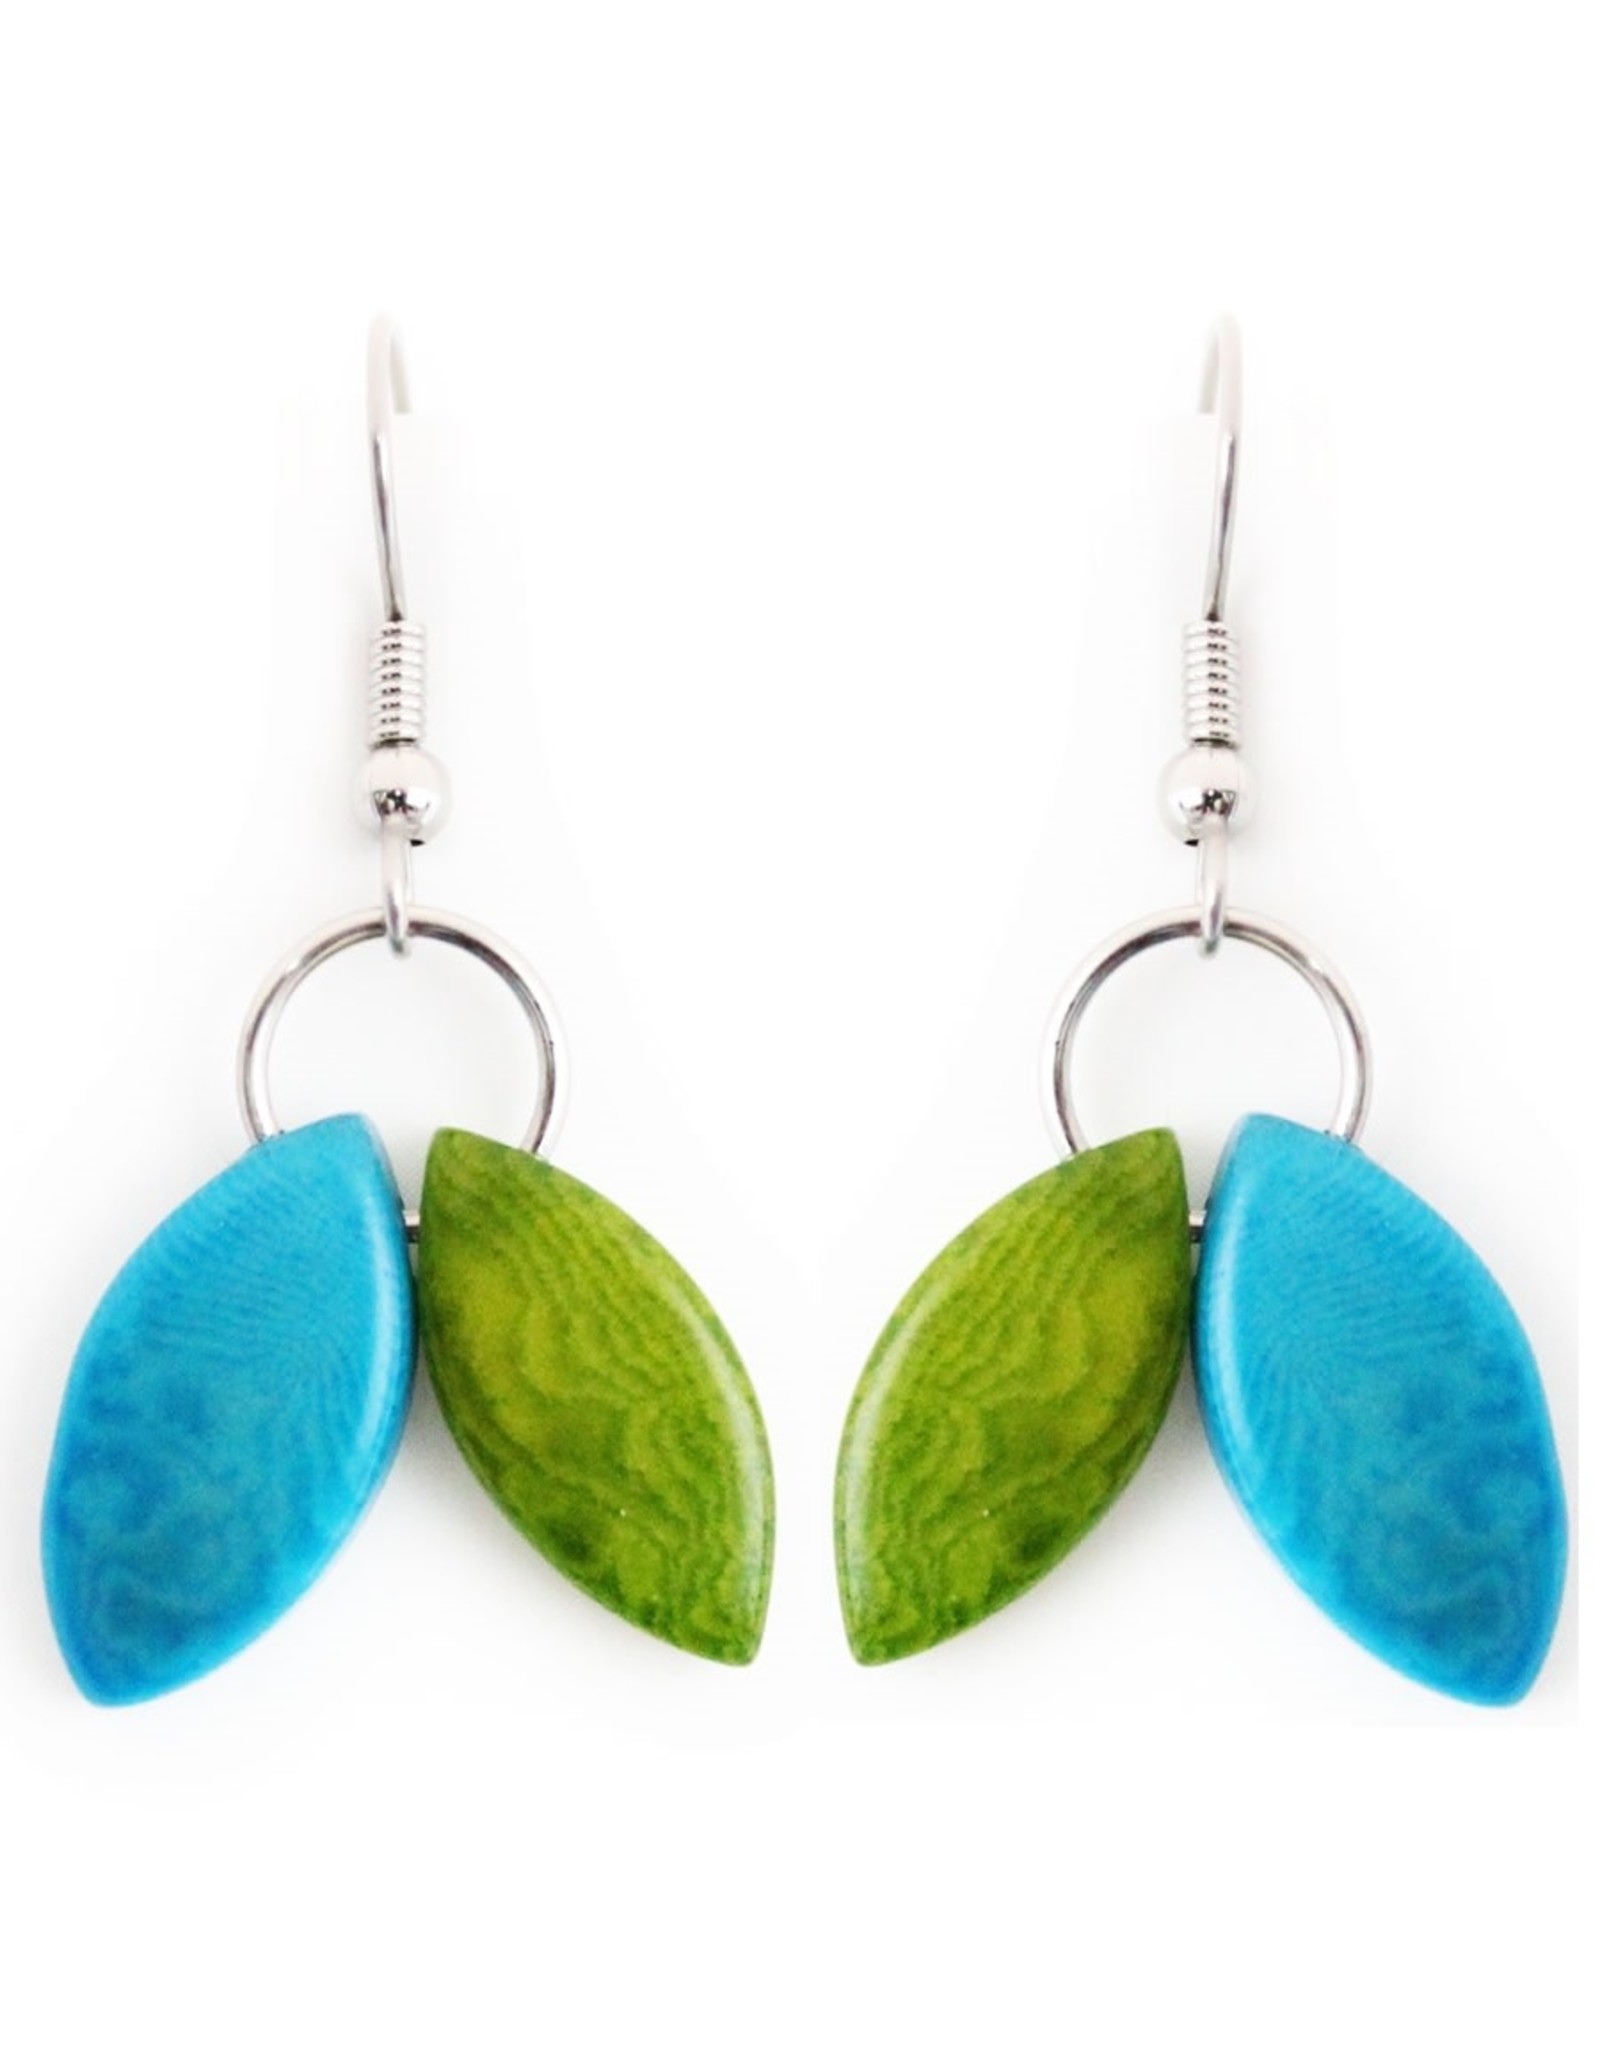 Colombia Amis Tagua Earrings, Colombia